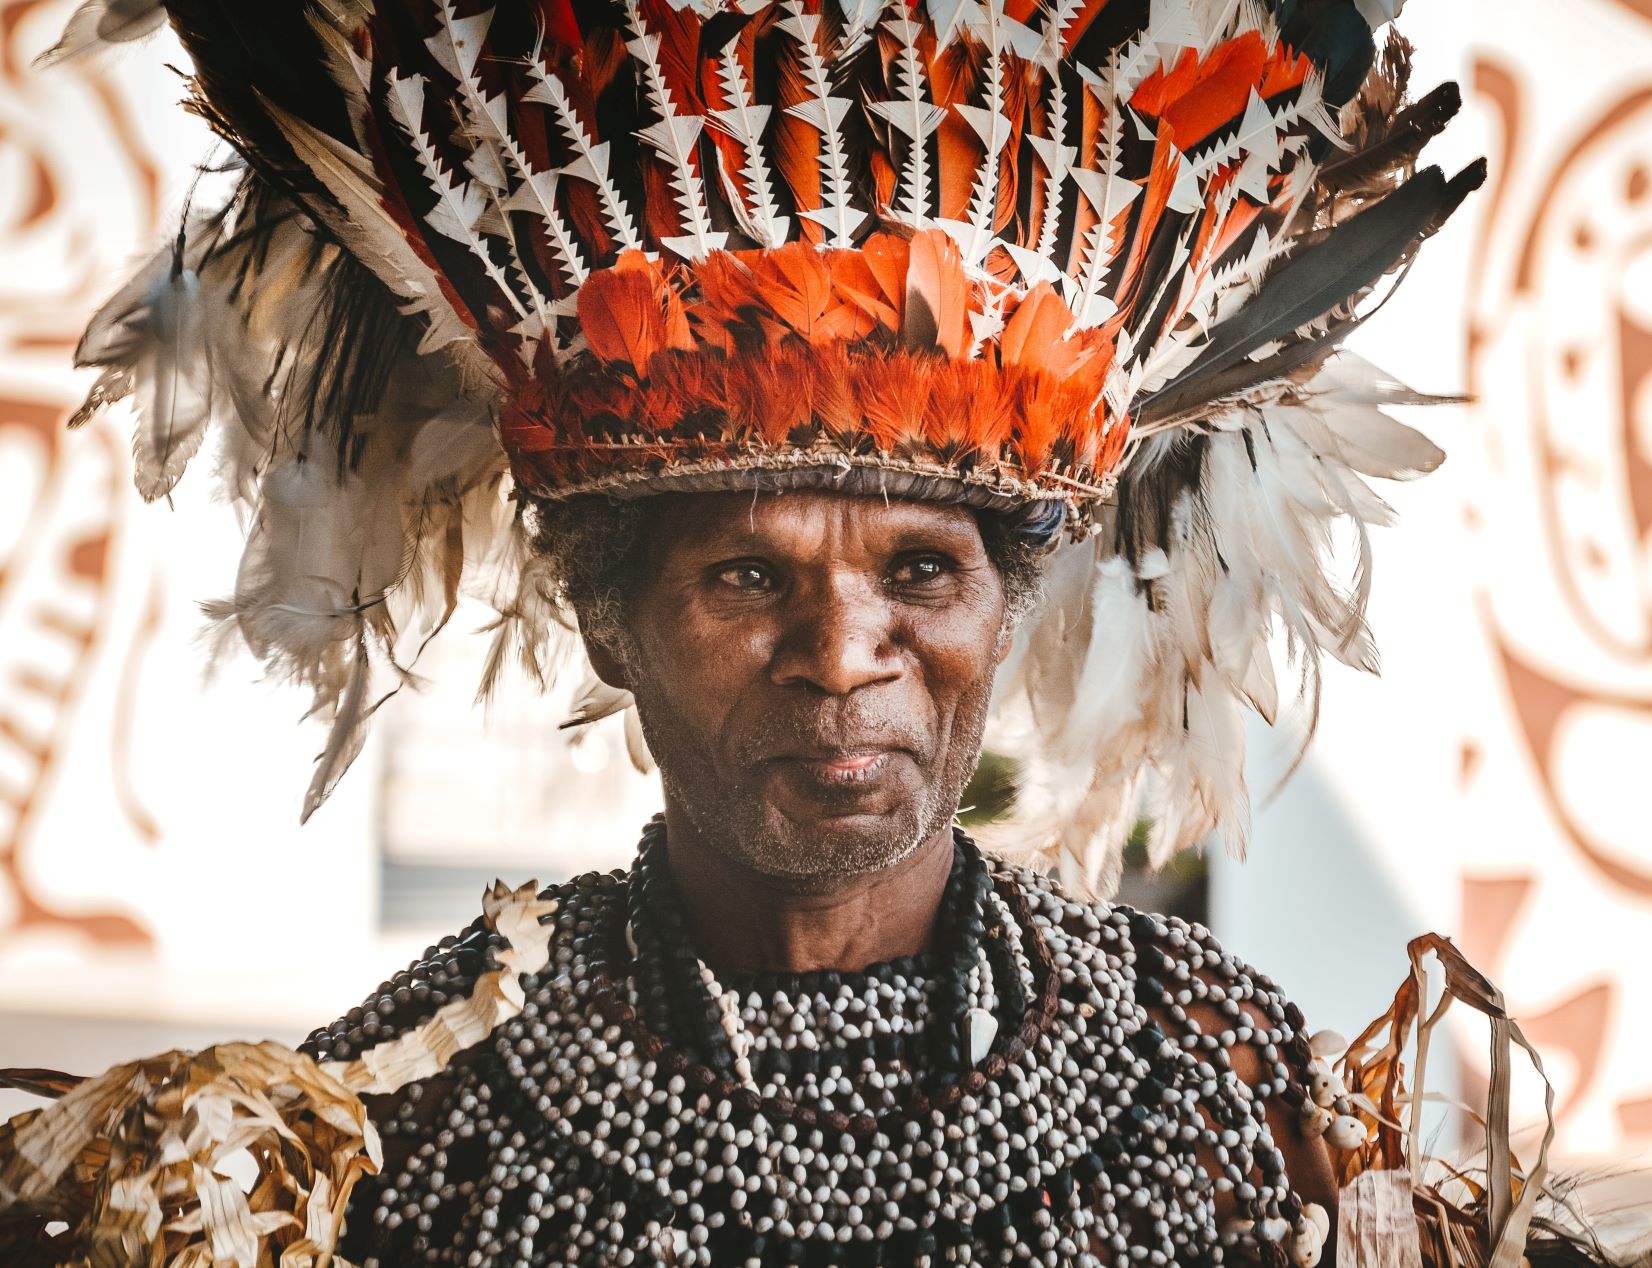 Tribal Leader with Feather Headdress - Photo by Adli Wahid on Unsplash